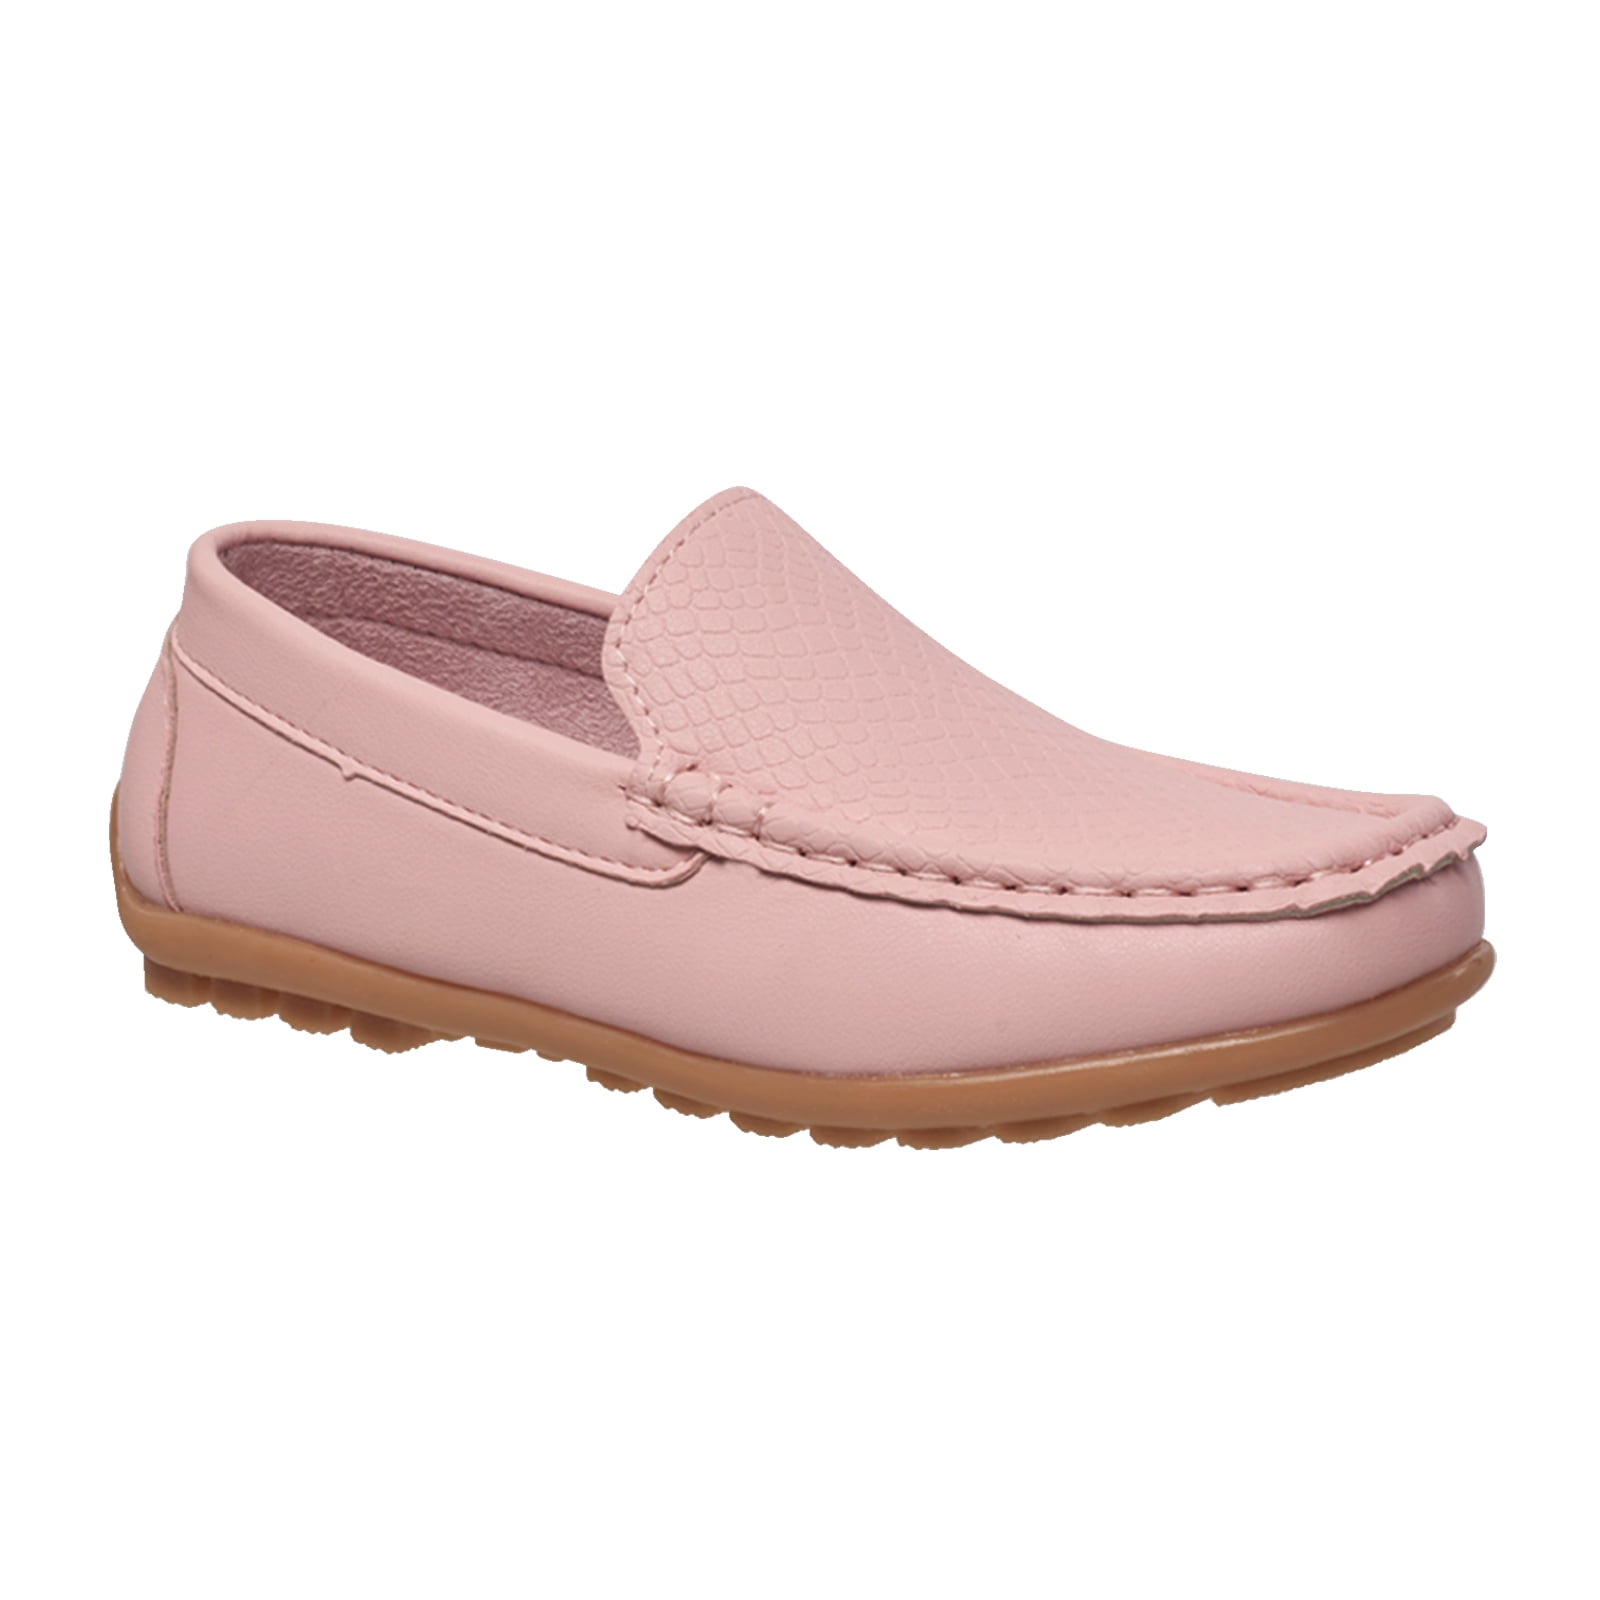 Kids Boys Girls Toddler Slip On Oxford Suede Flat Loafers Casual Boat Shoe Size